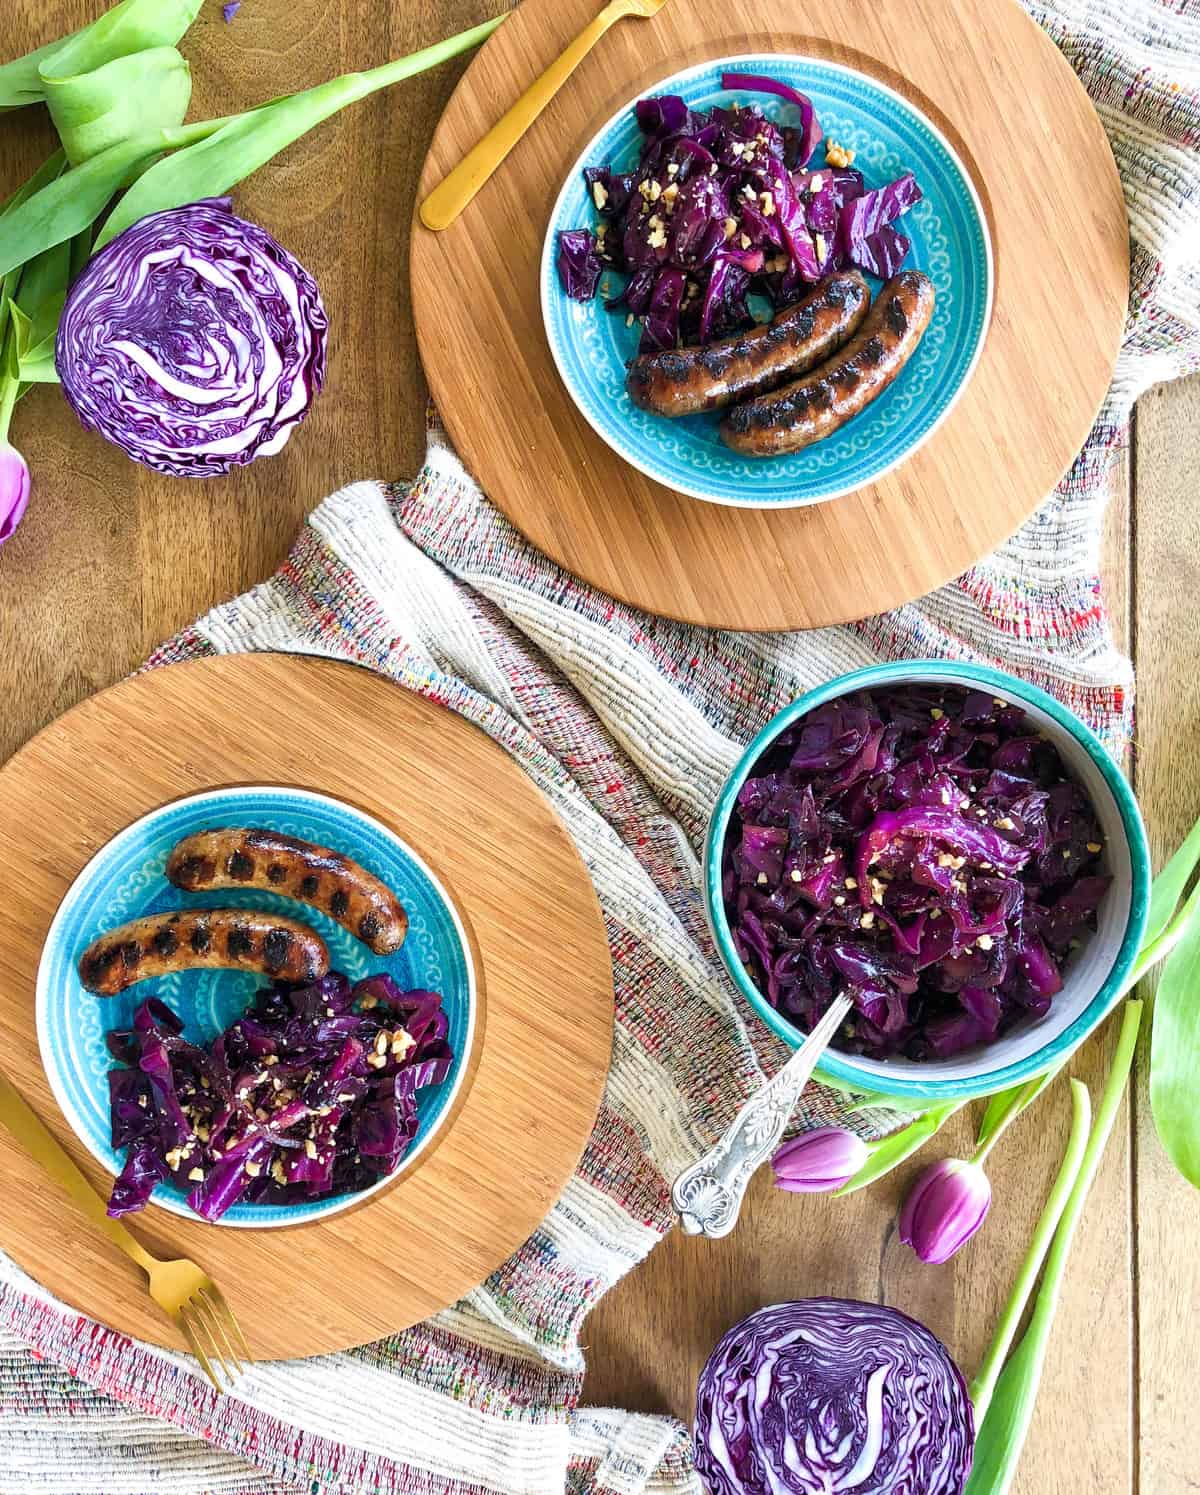 Braised Red Cabbage topped with Crushed Walnuts